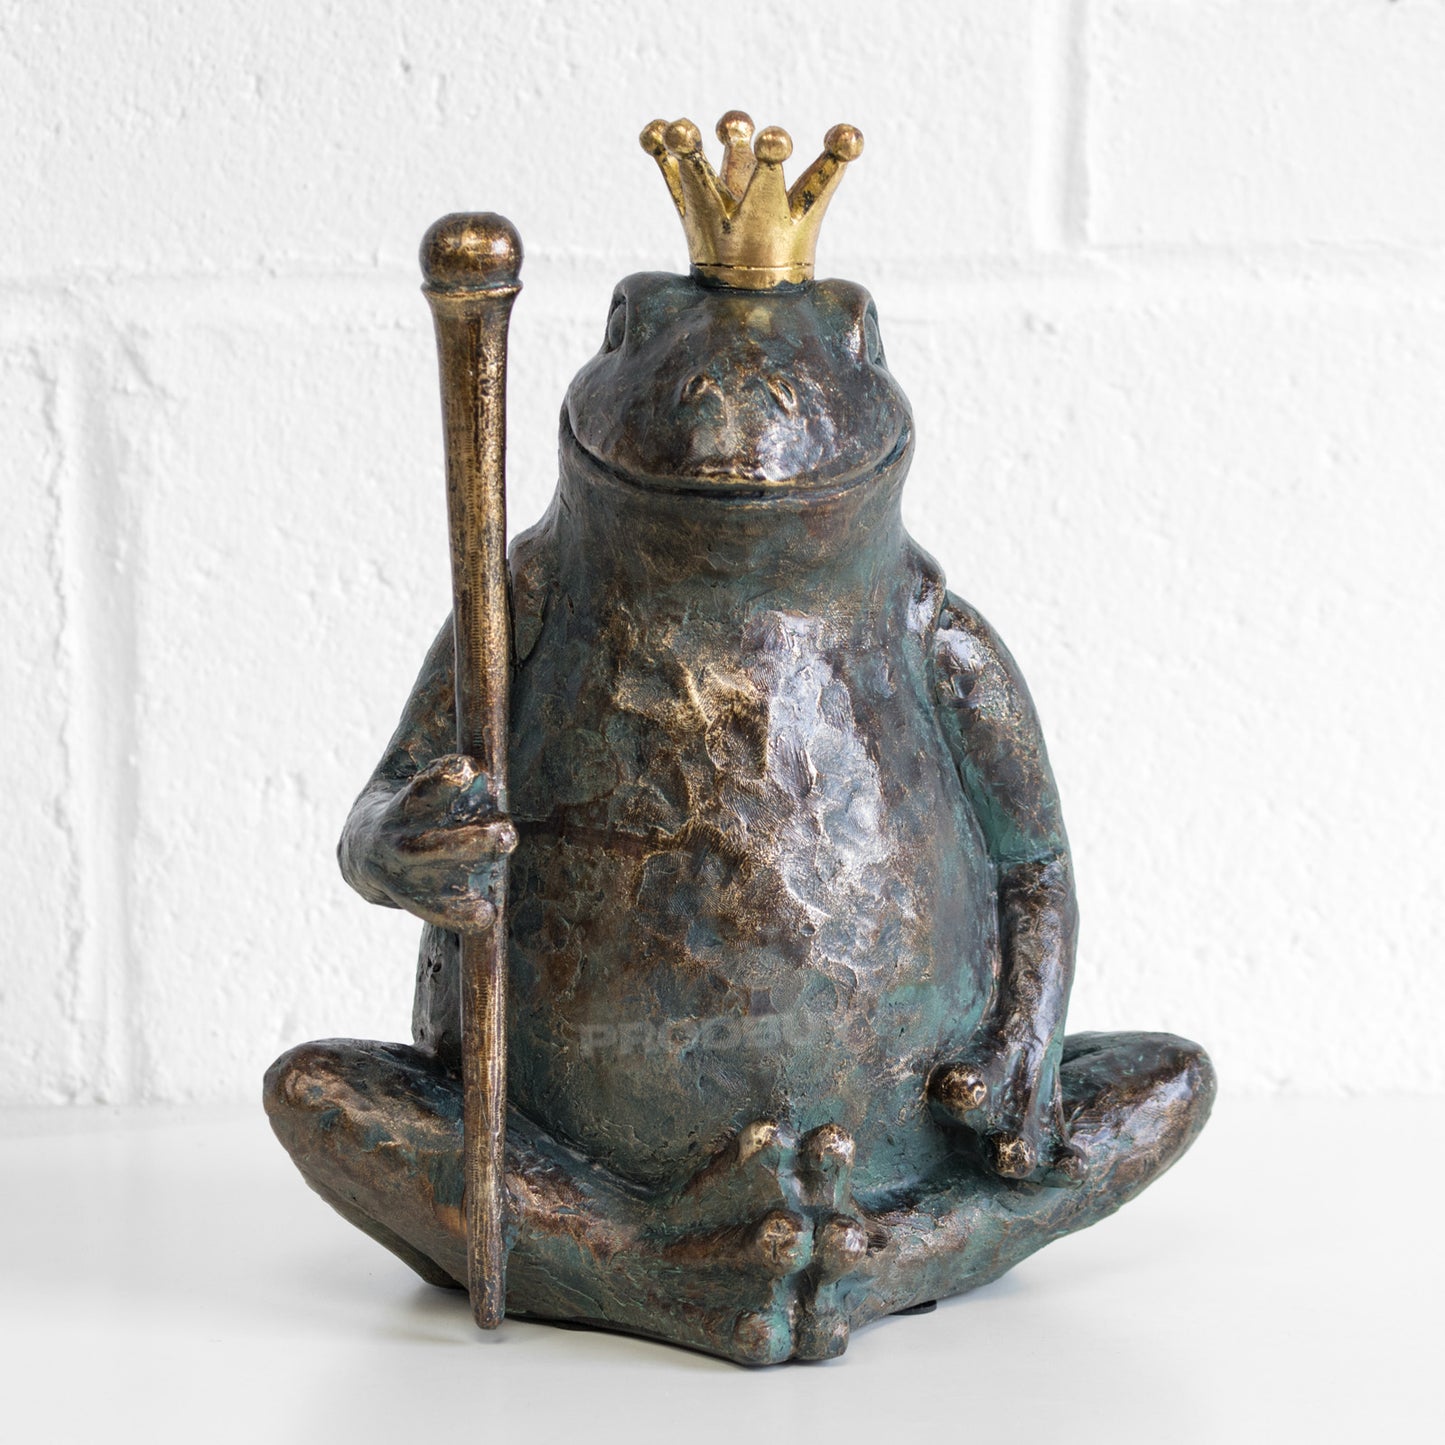 11" Royal Frog King with Crown & Sceptre Outdoor Garden Ornament